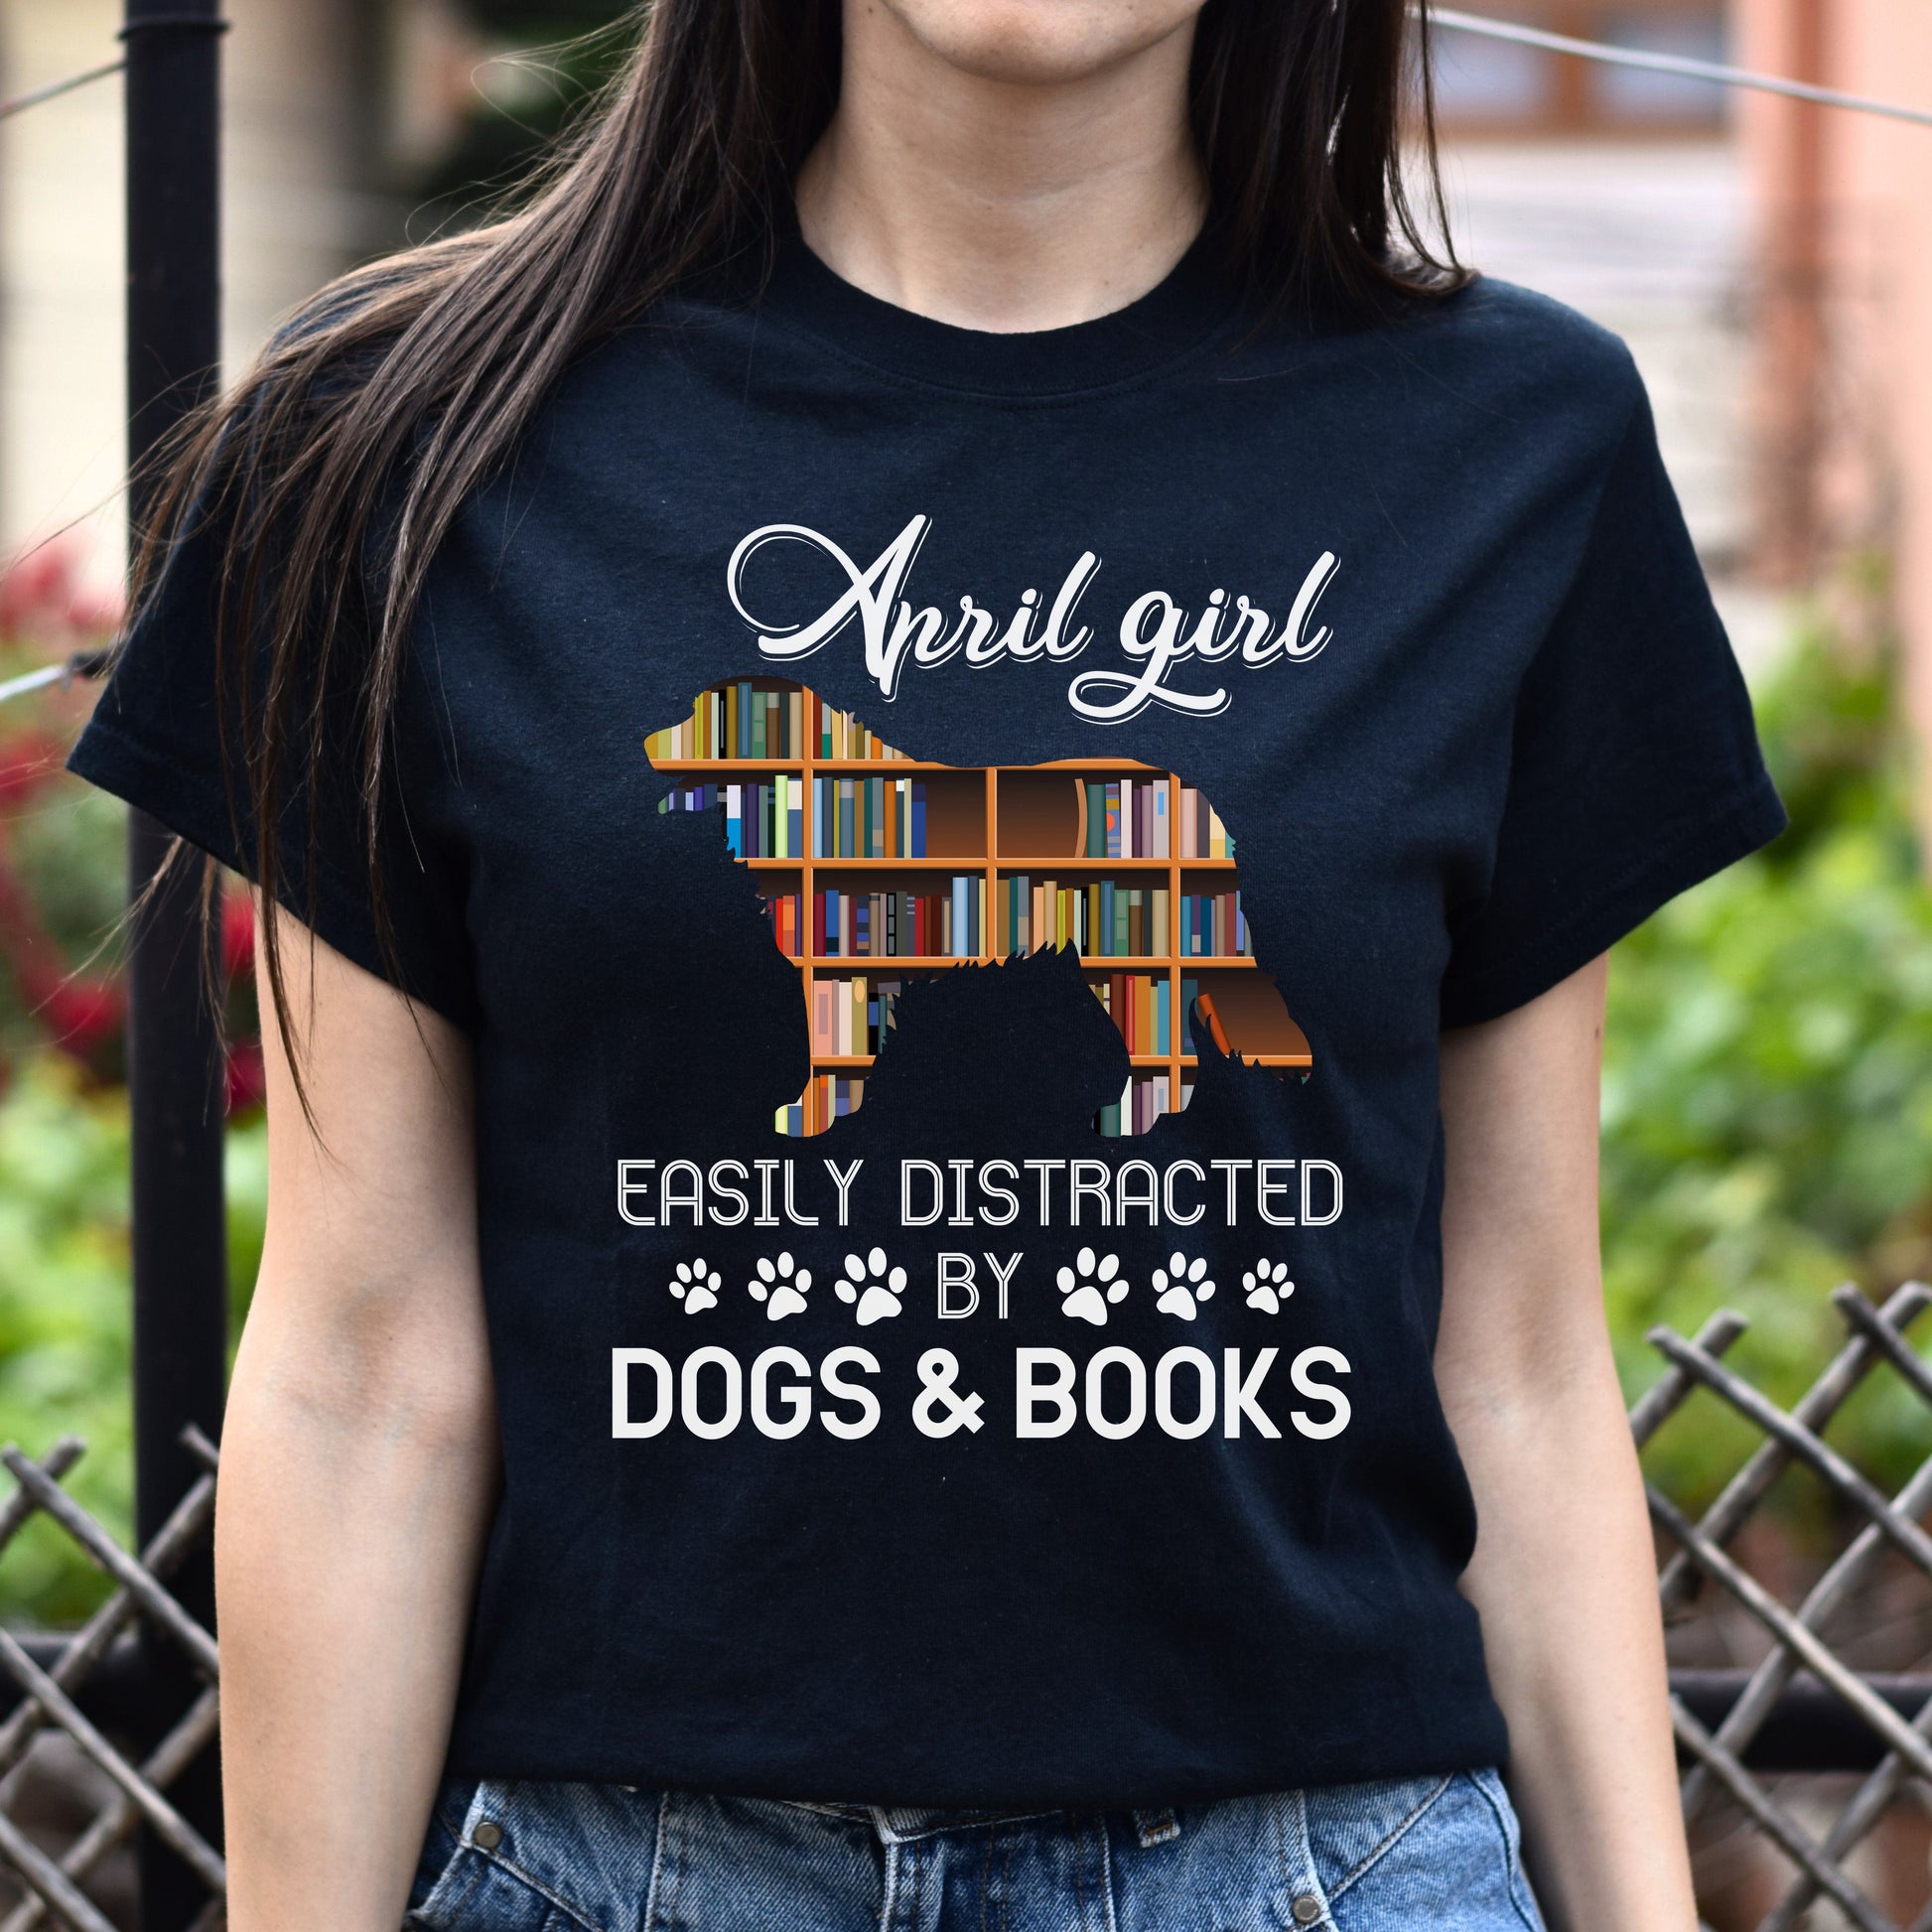 April girl - Easily distracted by dogs and books Unisex T-Shirt gift black dark heather-Family-Gift-Planet